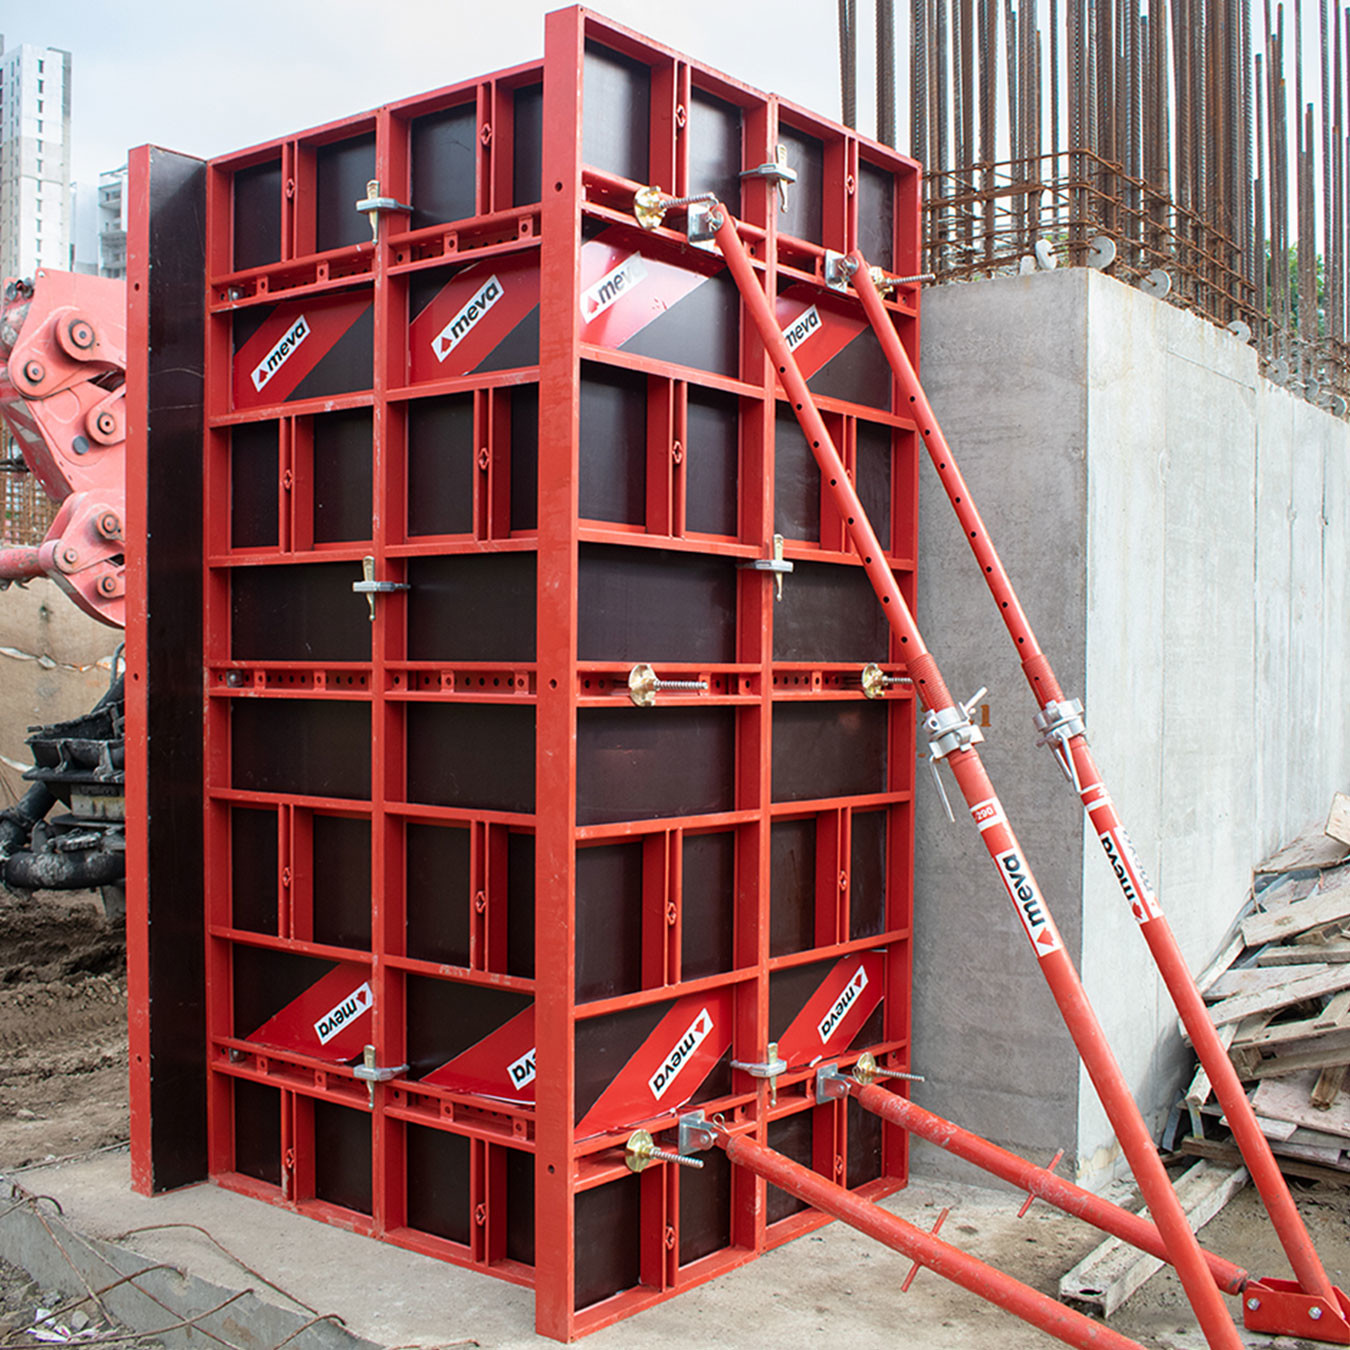 Wall formwork and props shown in construction of walls